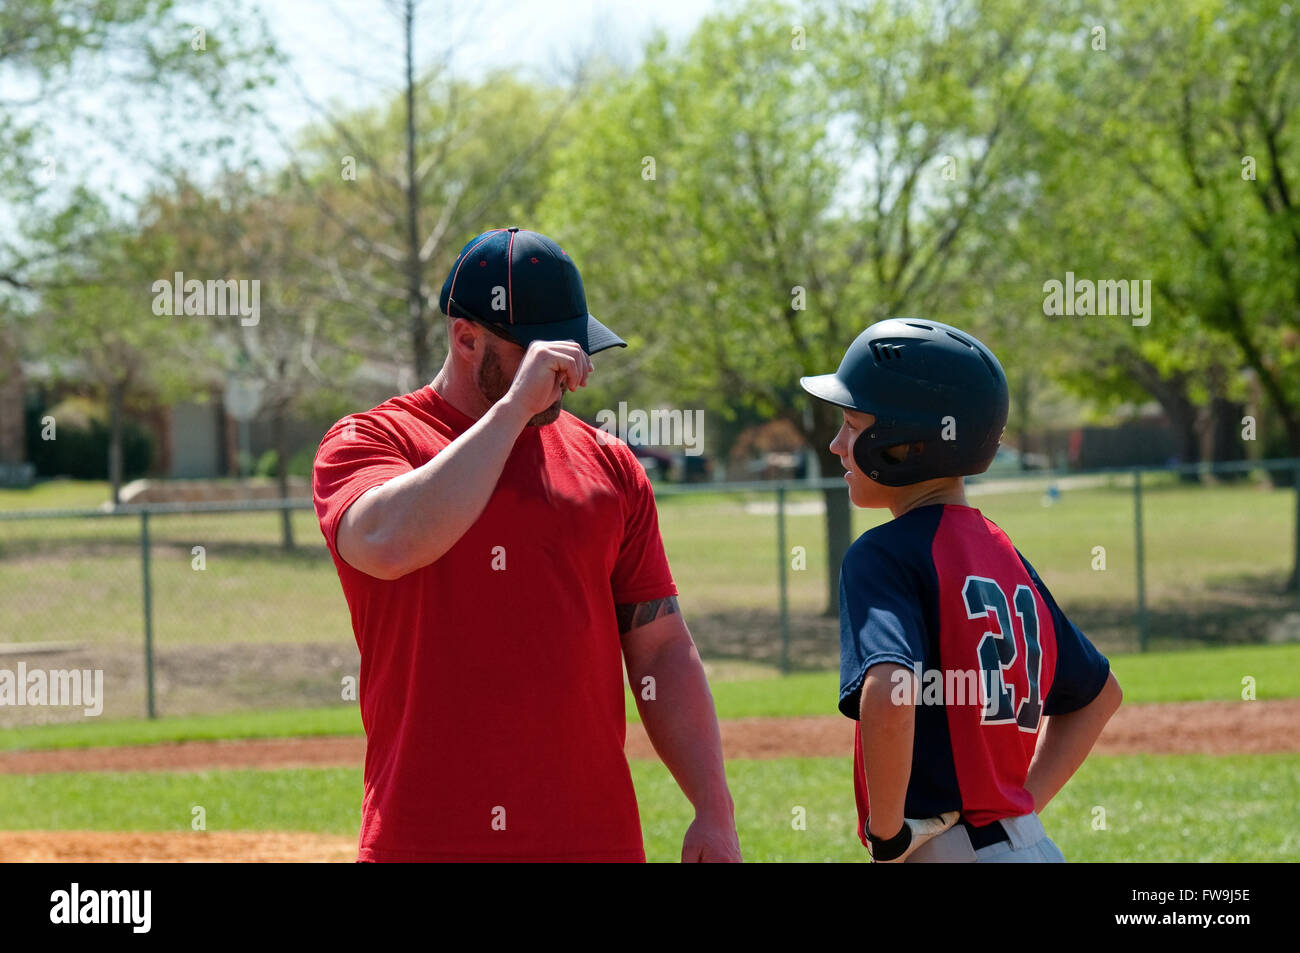 Baseball coach giving signals to teen player Stock Photo